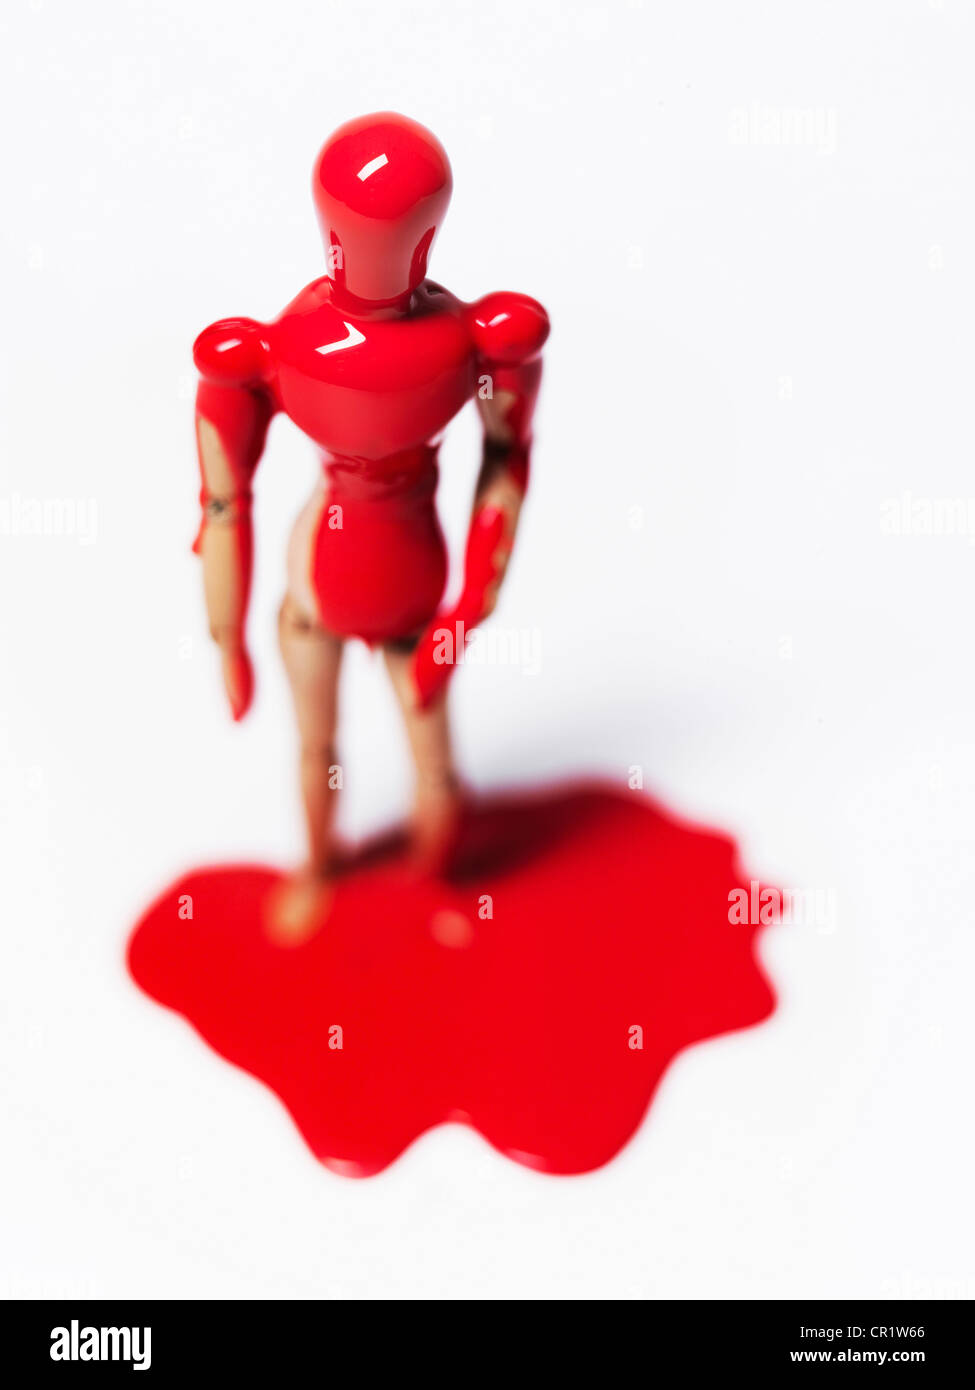 Wooden figurine splashed with paint Stock Photo